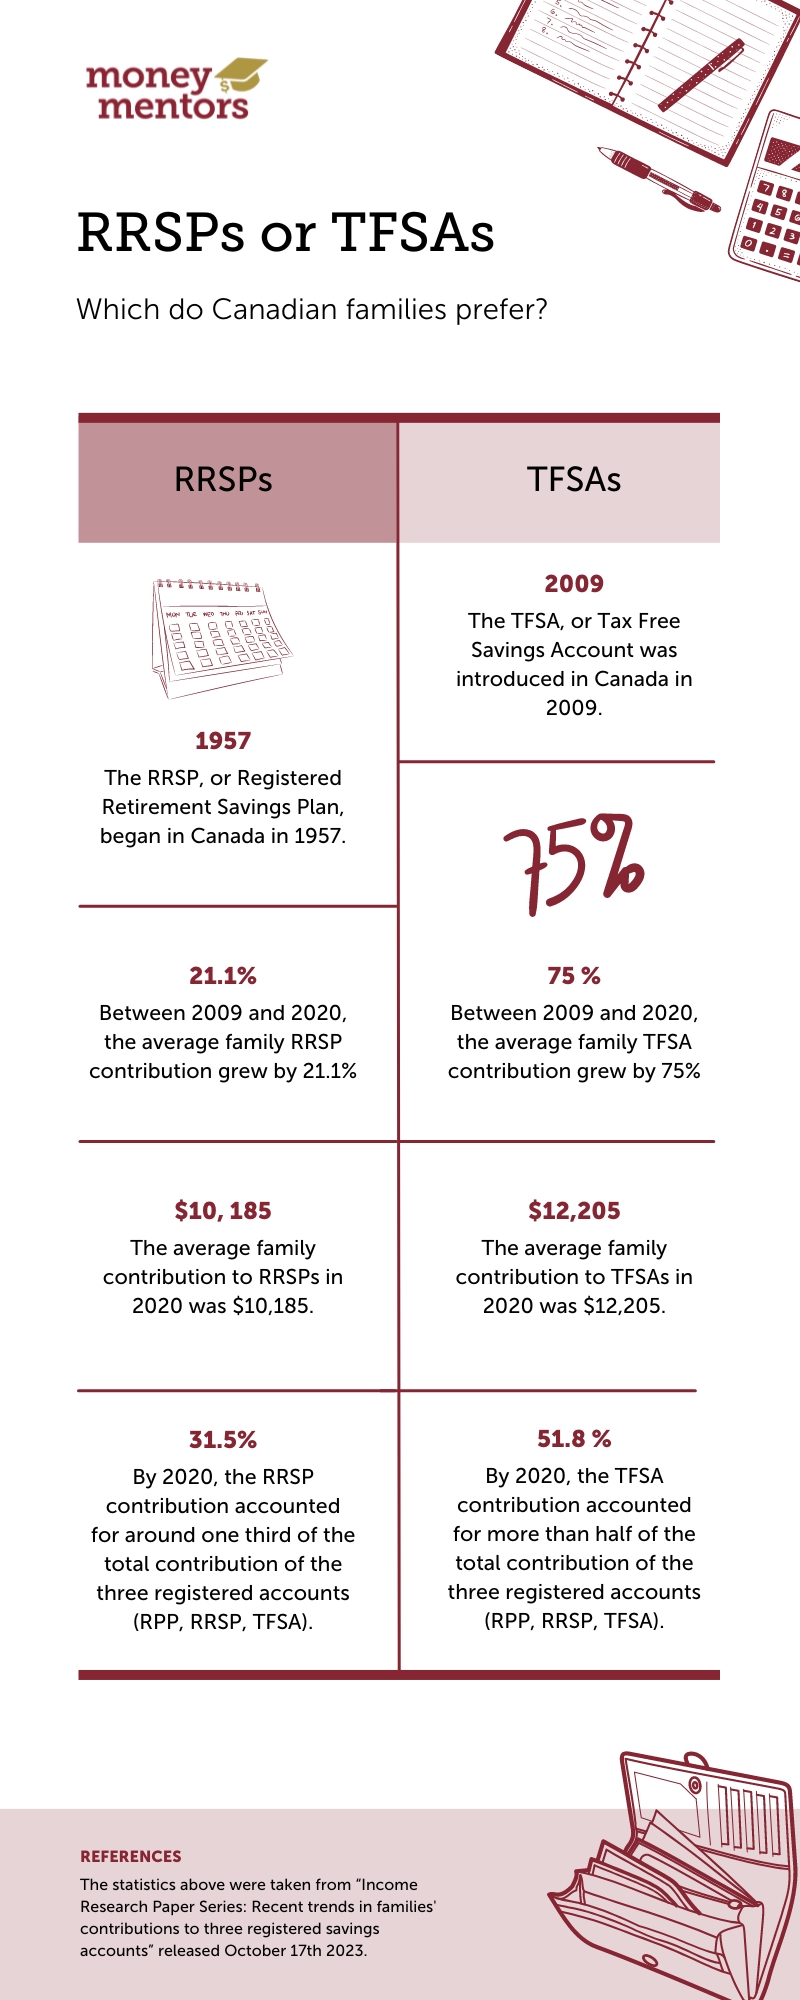 Infographic by Money Mentors showing a comparison between RRSPs, introduced in 1957, and TFSAs, introduced in 2009, detailing Canadian families' preference and contribution growth to these savings accounts up to 2020.